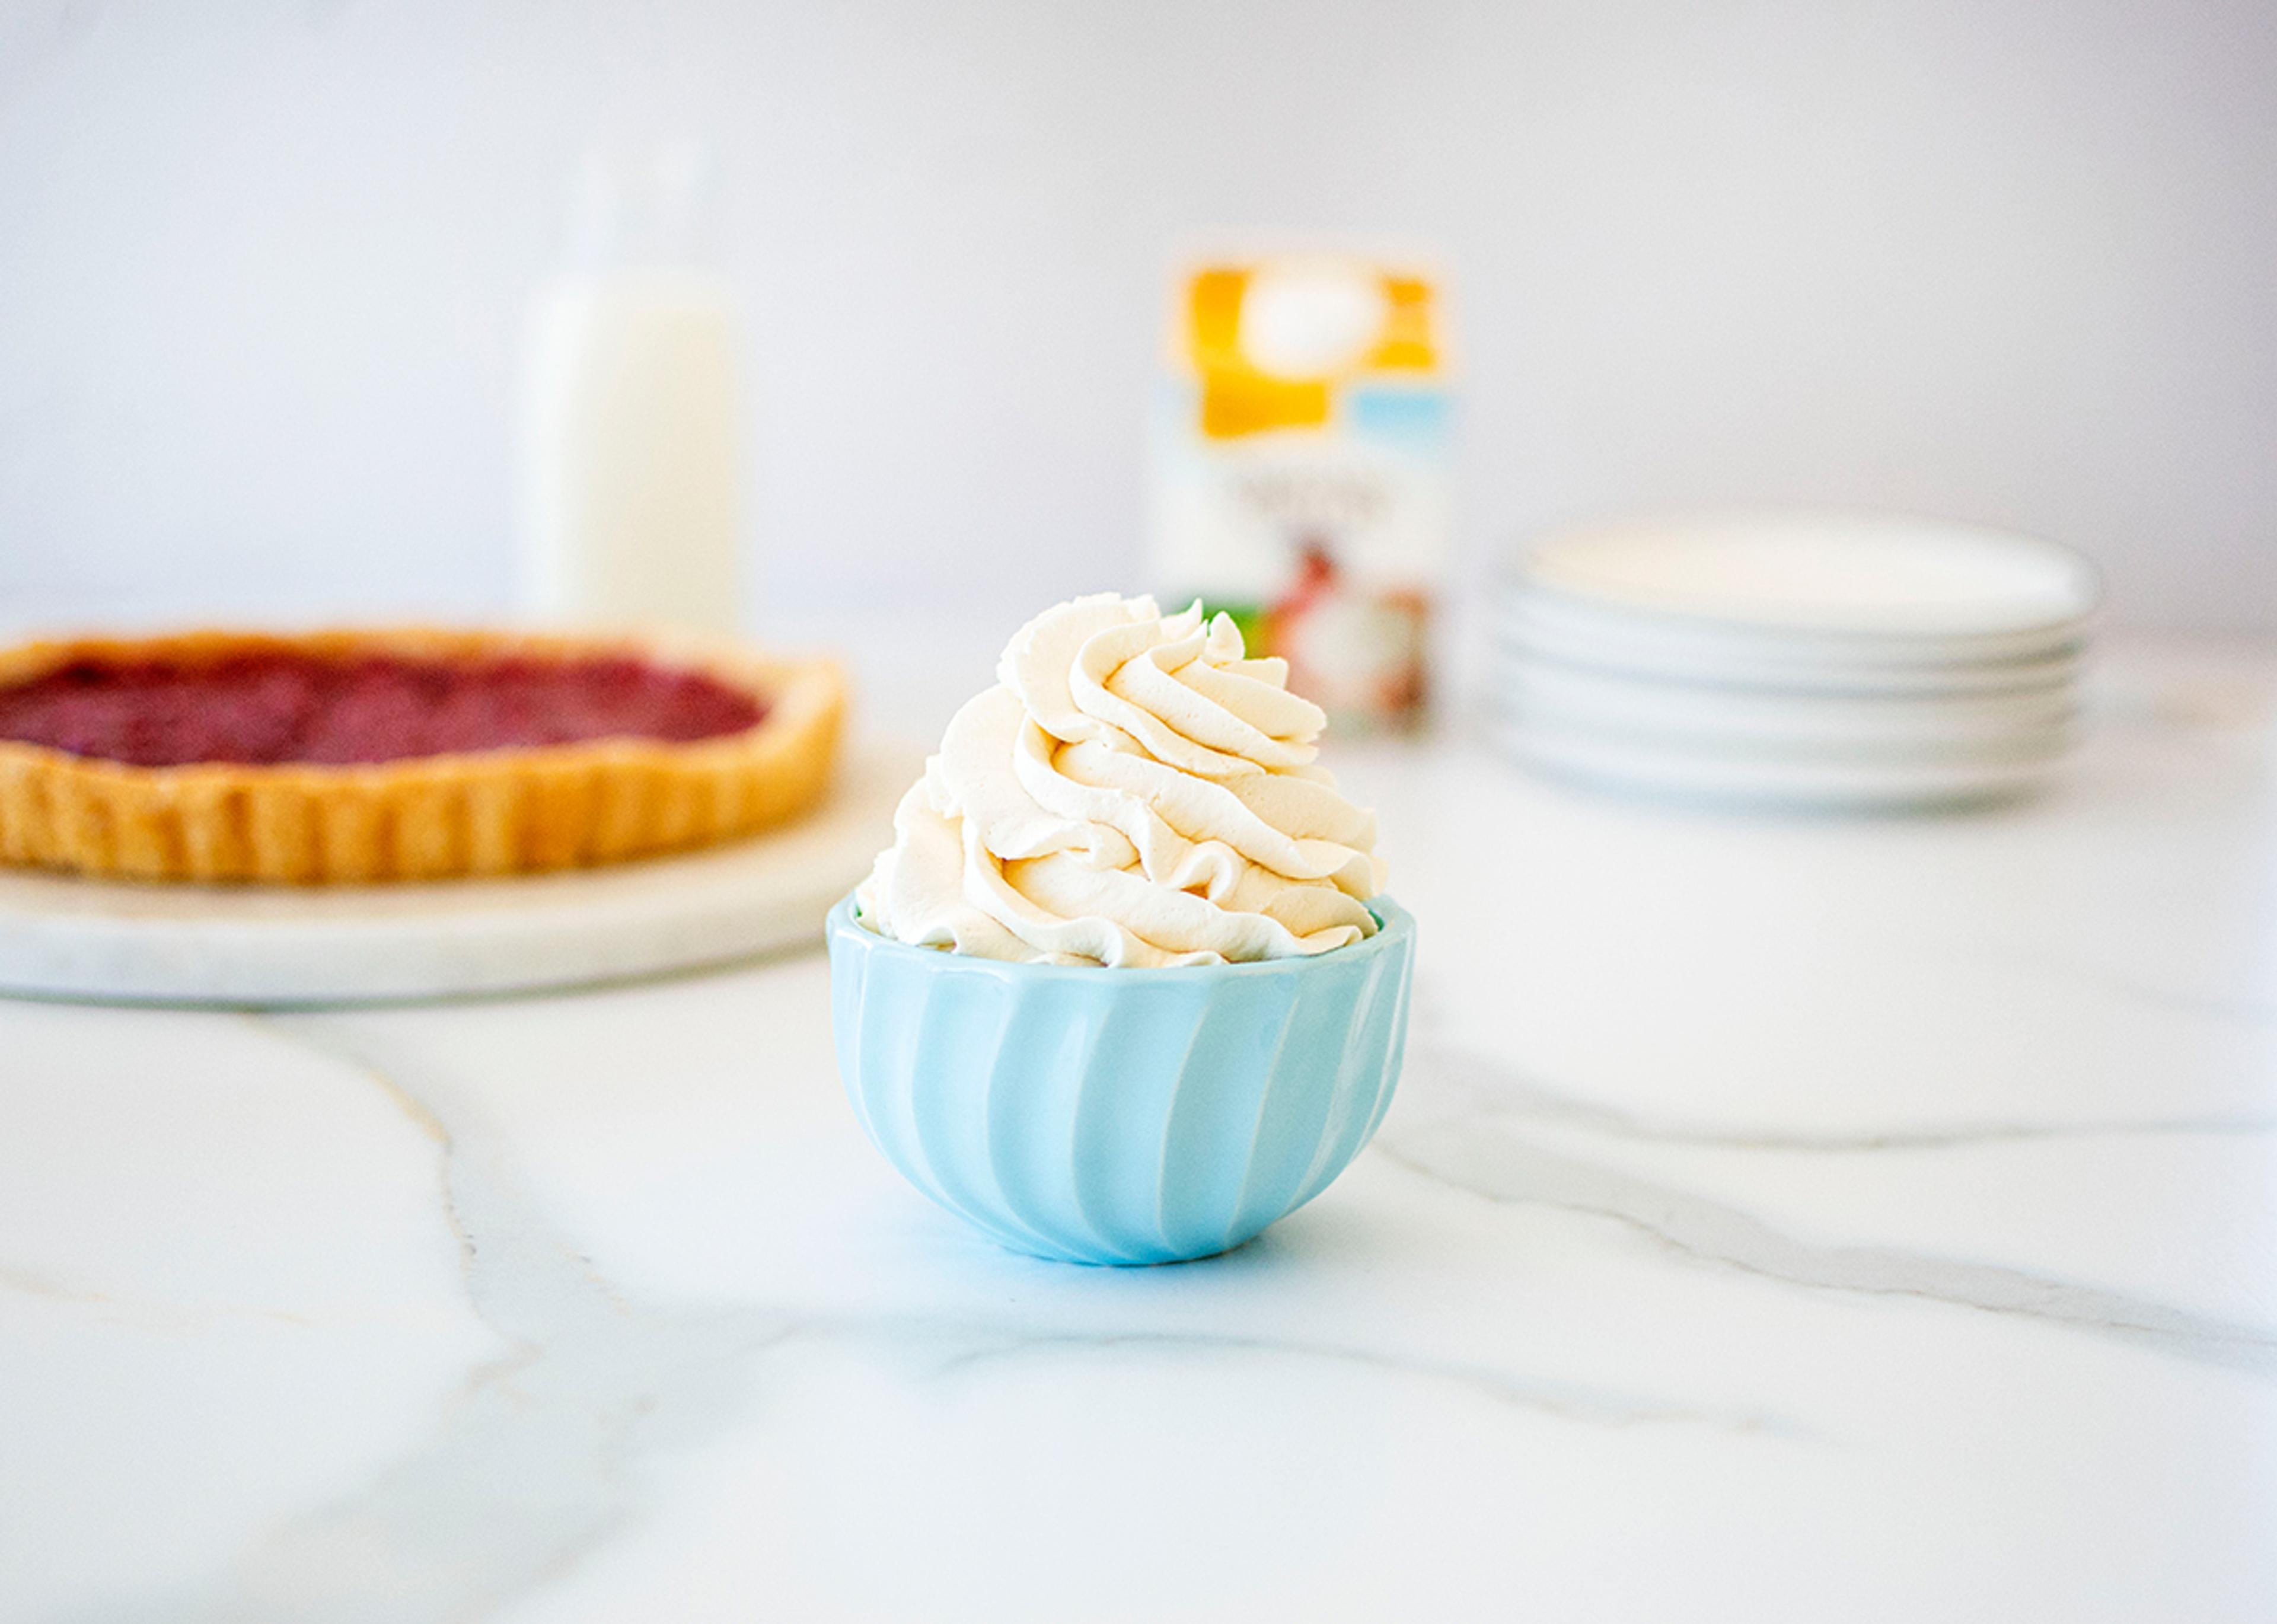 Homemade whipped cream piped in a bowl and ready to eat!